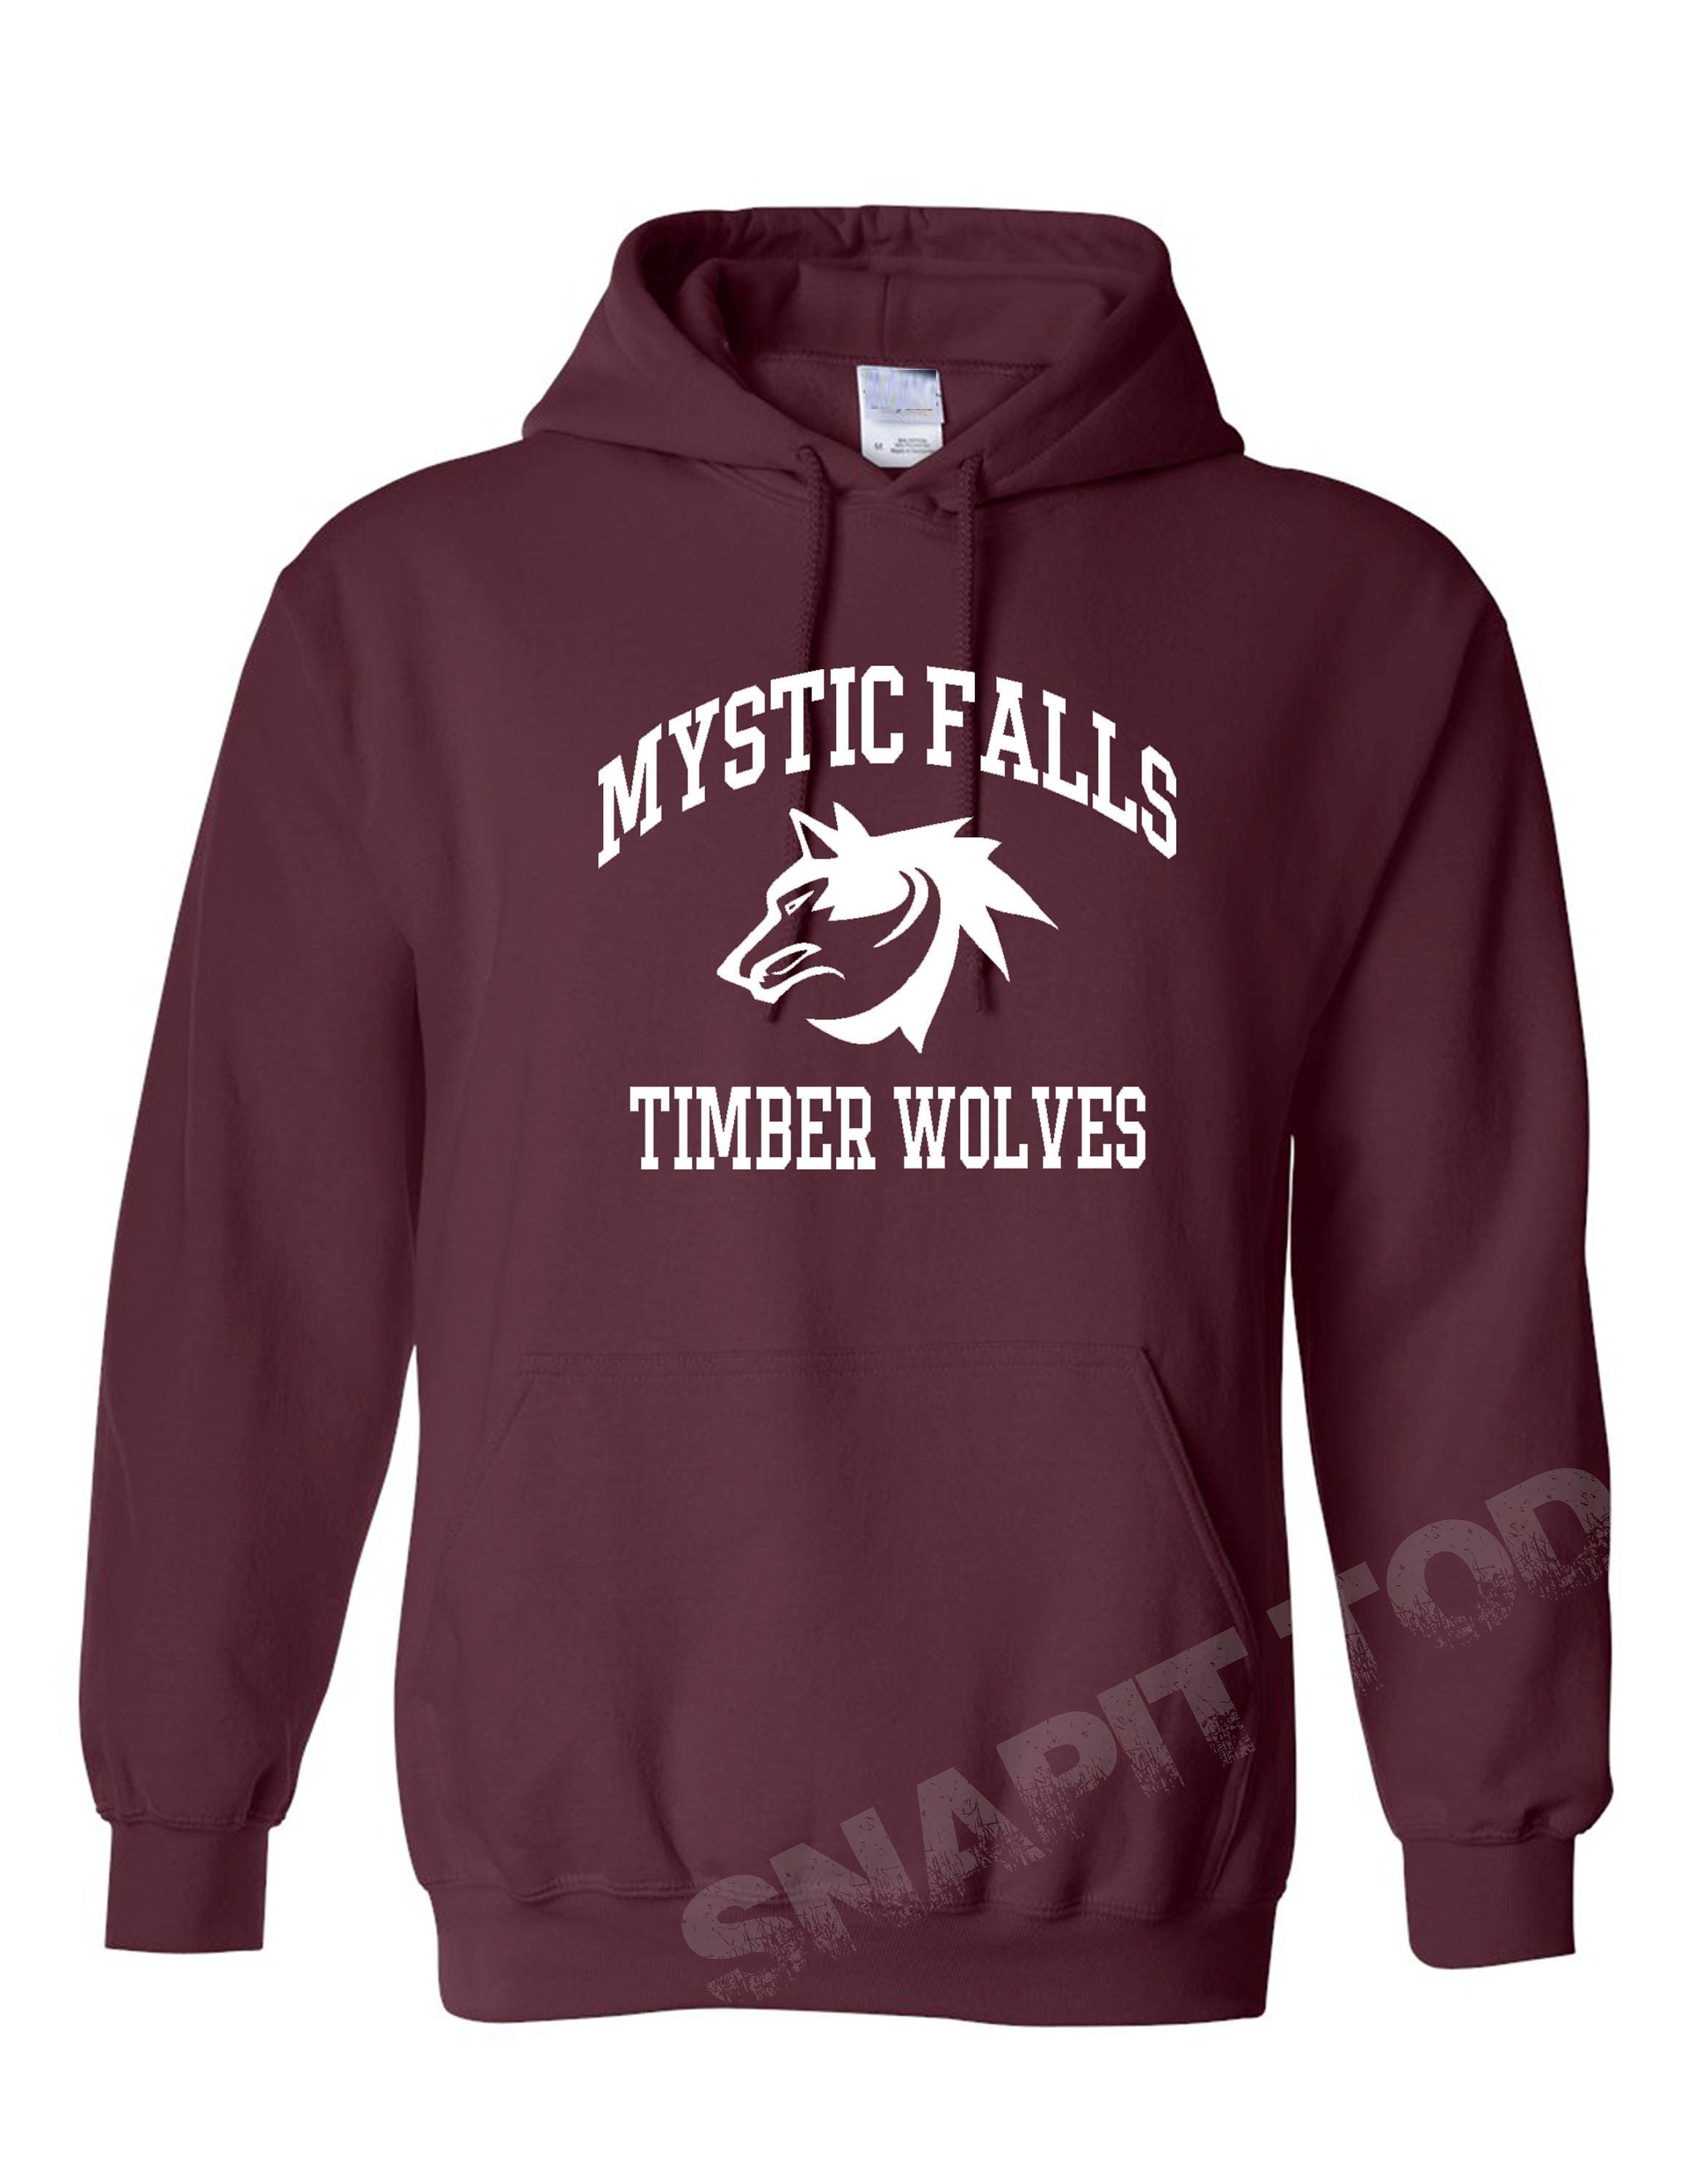 Mystic Falls Timber Wolves Front Print hoodie The Vampire Diaries inspired Hoodies Holiday Gift